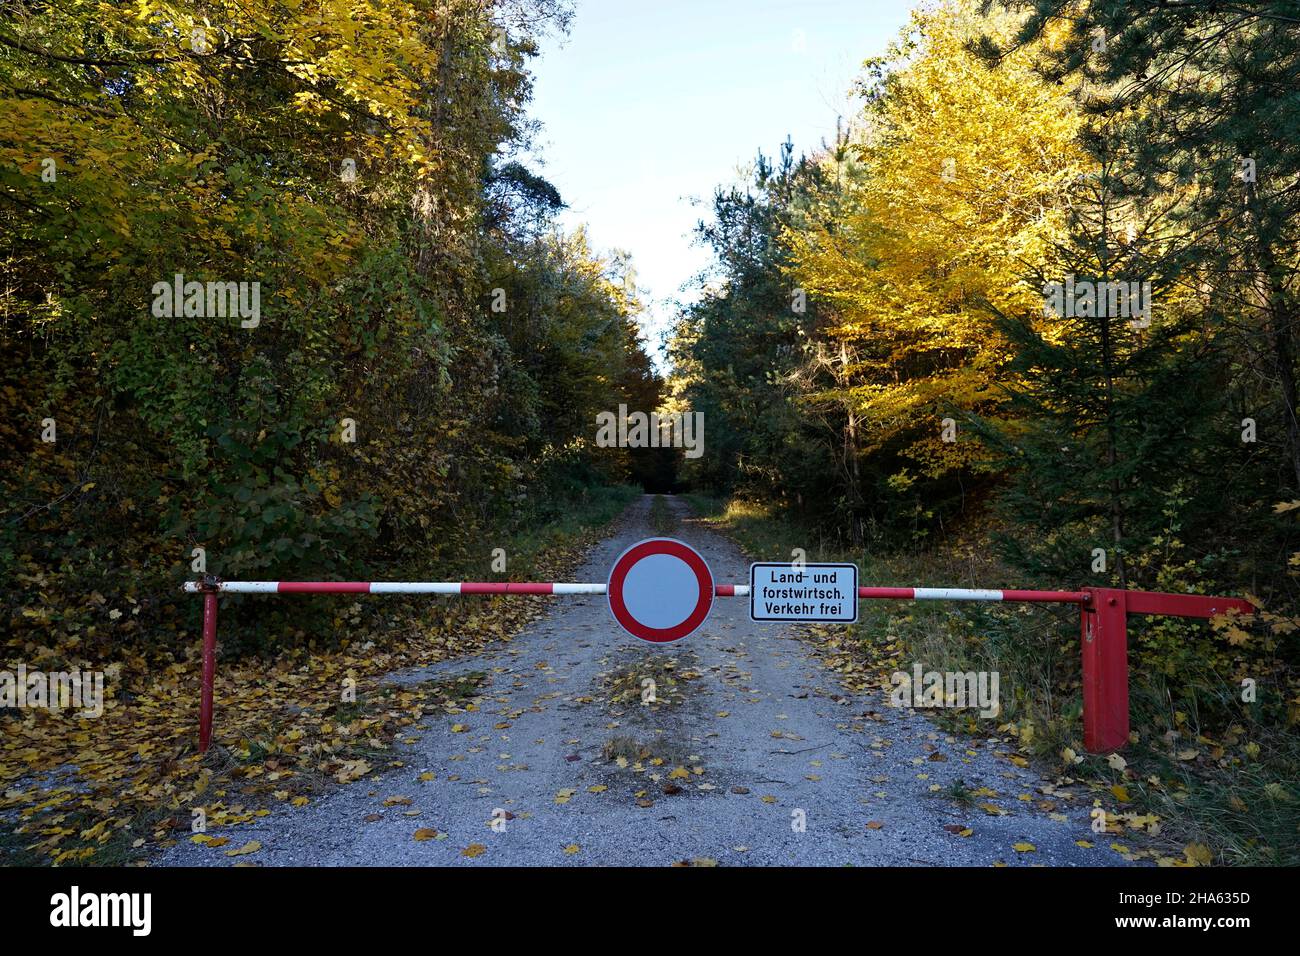 germany,bavaria,upper bavaria,altötting district,mixed forest,autumnal colorful deciduous trees,forest road,locked,barrier Stock Photo